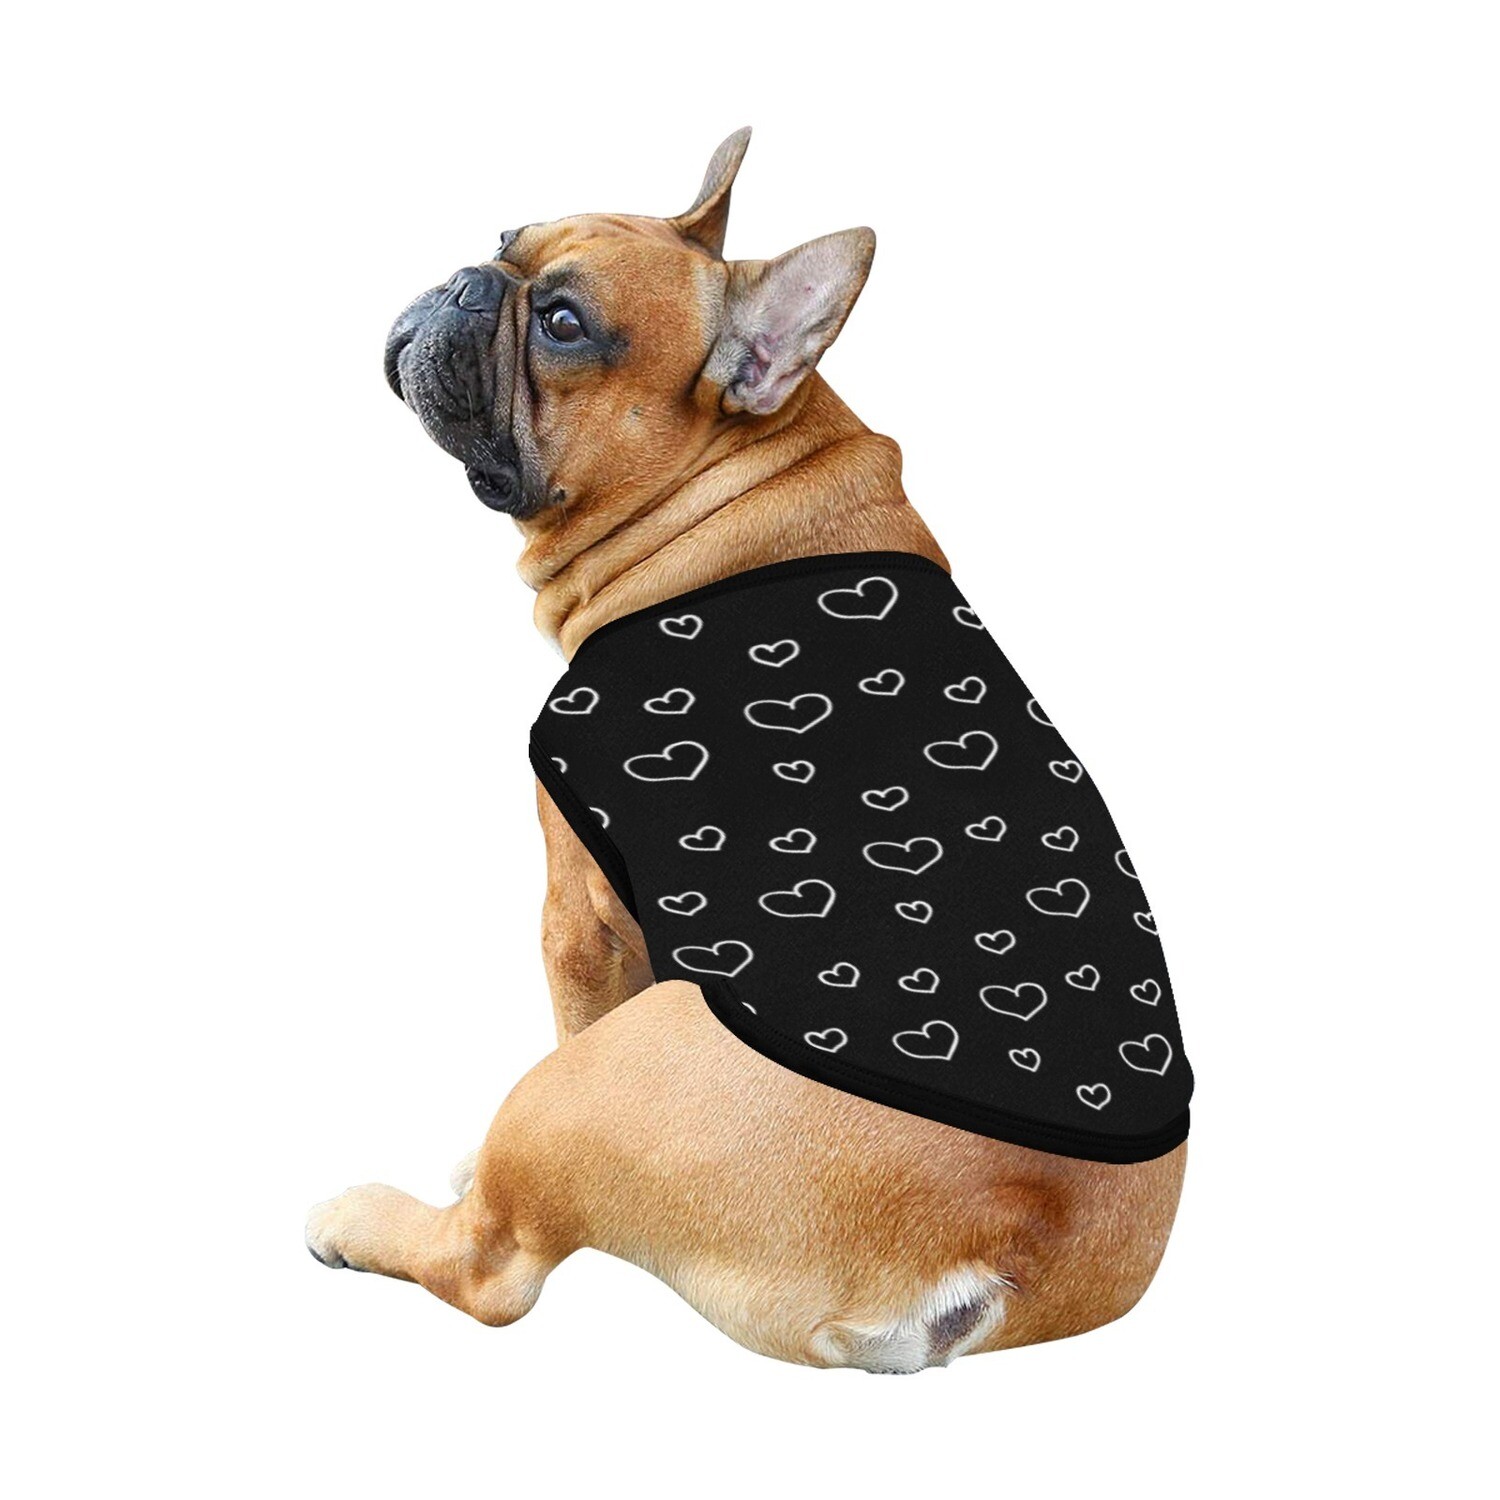 🐕 Valentine white outline hearts on black, Valentine's day, love, heart pattern, Valentine gift, Dog shirt, Dog Tank Top, Dog t-shirt, Dog clothes, Gifts, 7 sizes XS to 3XL, dog gifts